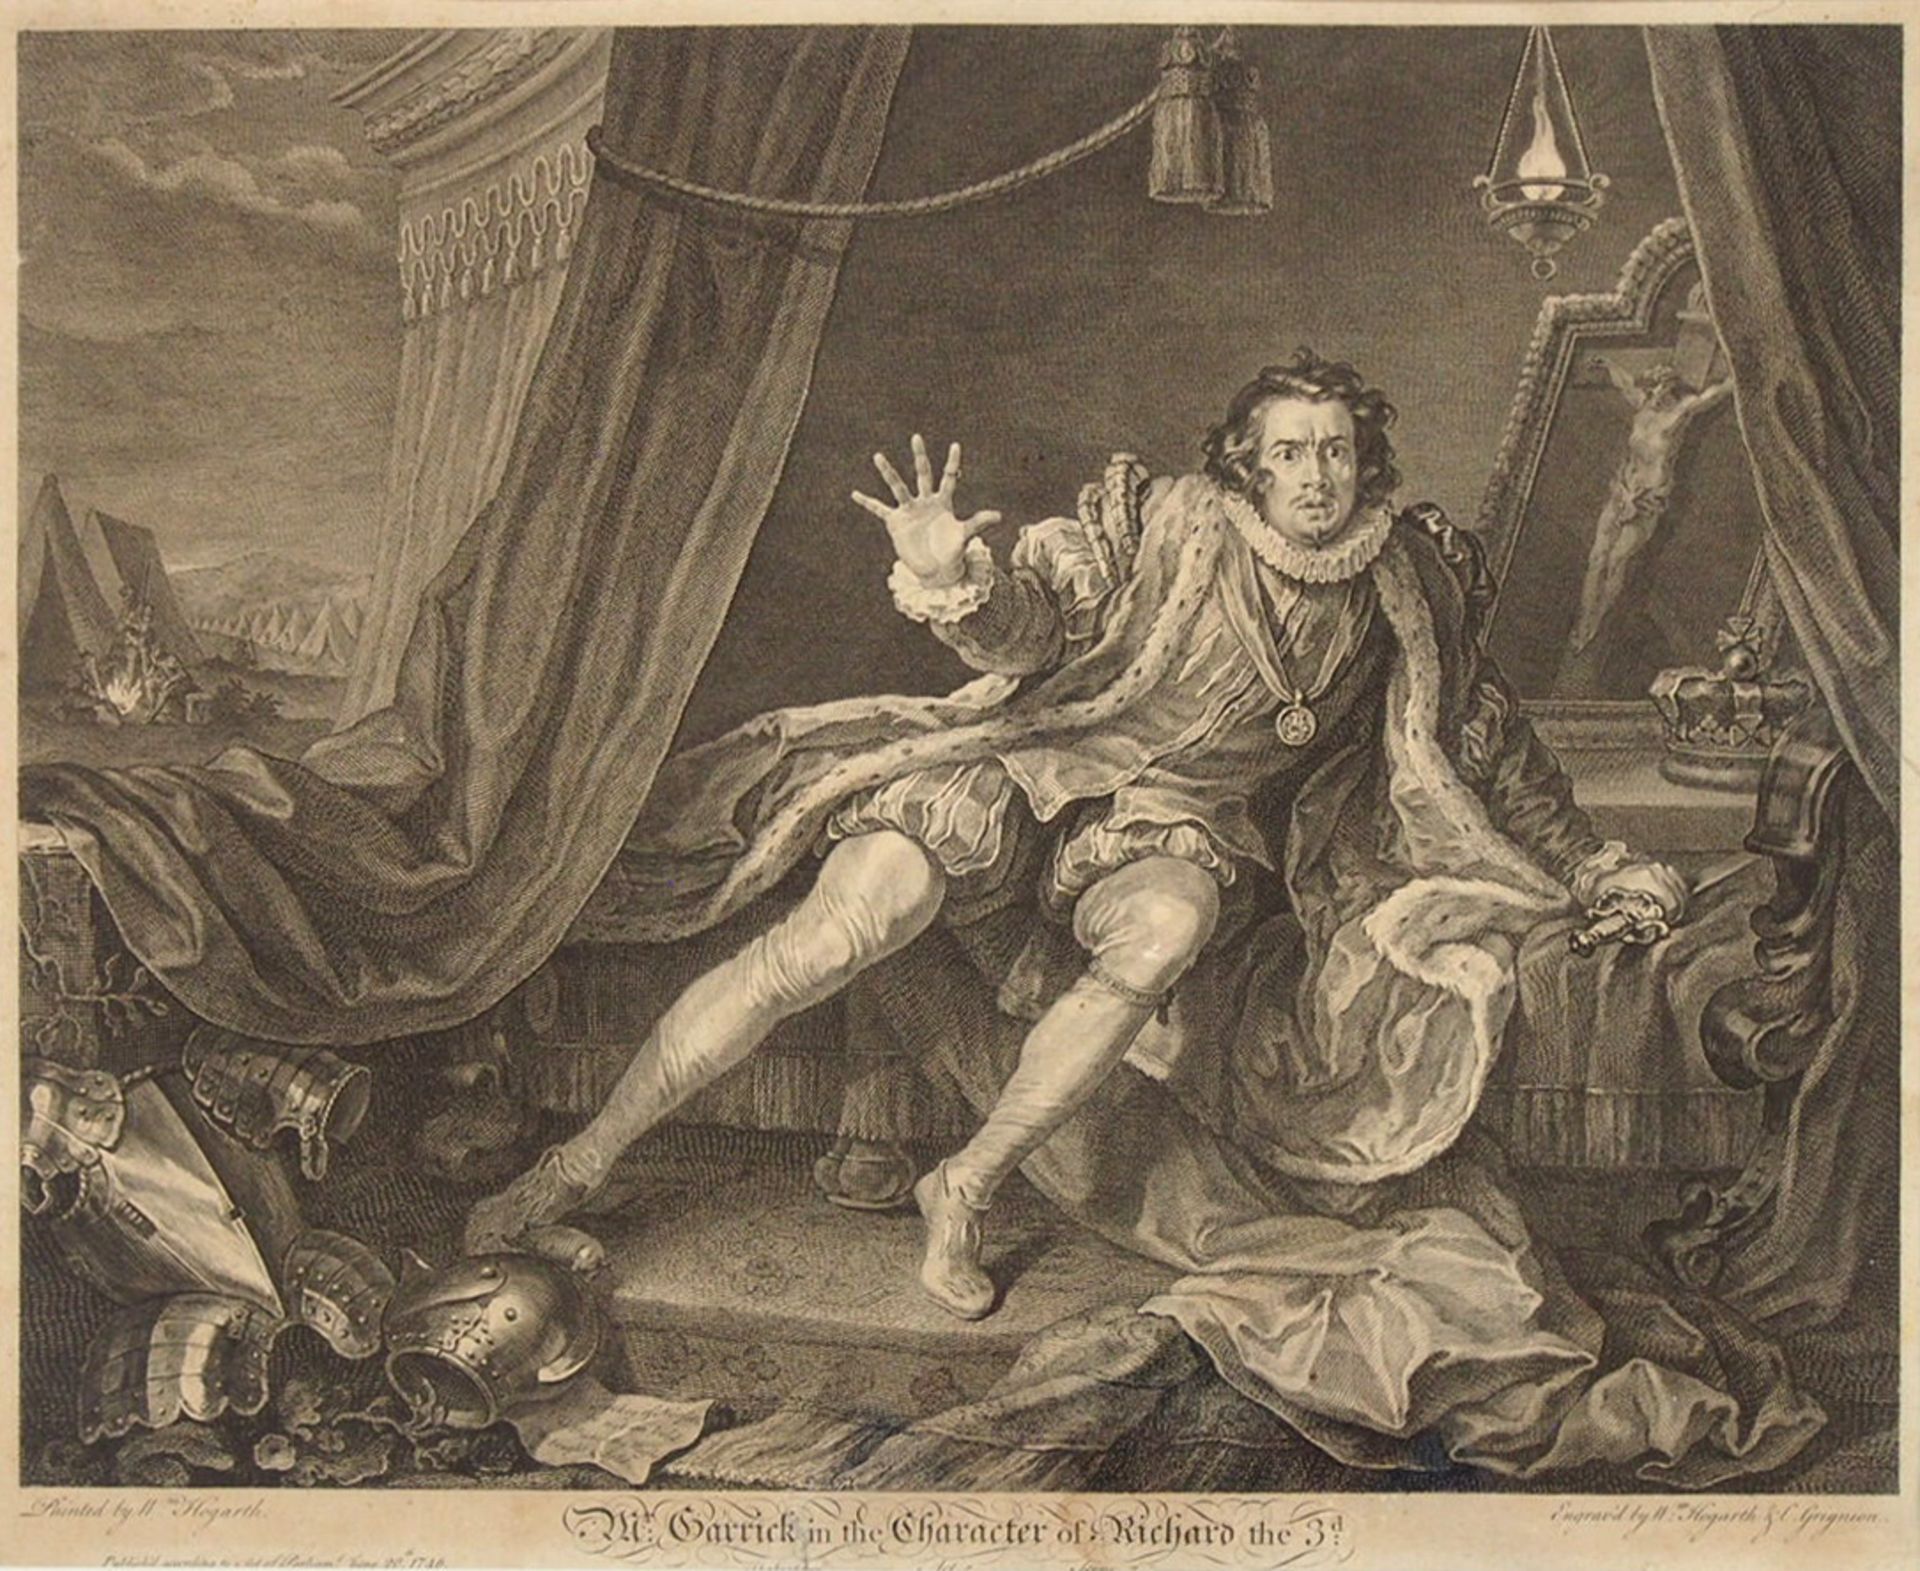 HOGARTH, William: Mr. Garrick in the Character of Richard the 3rd